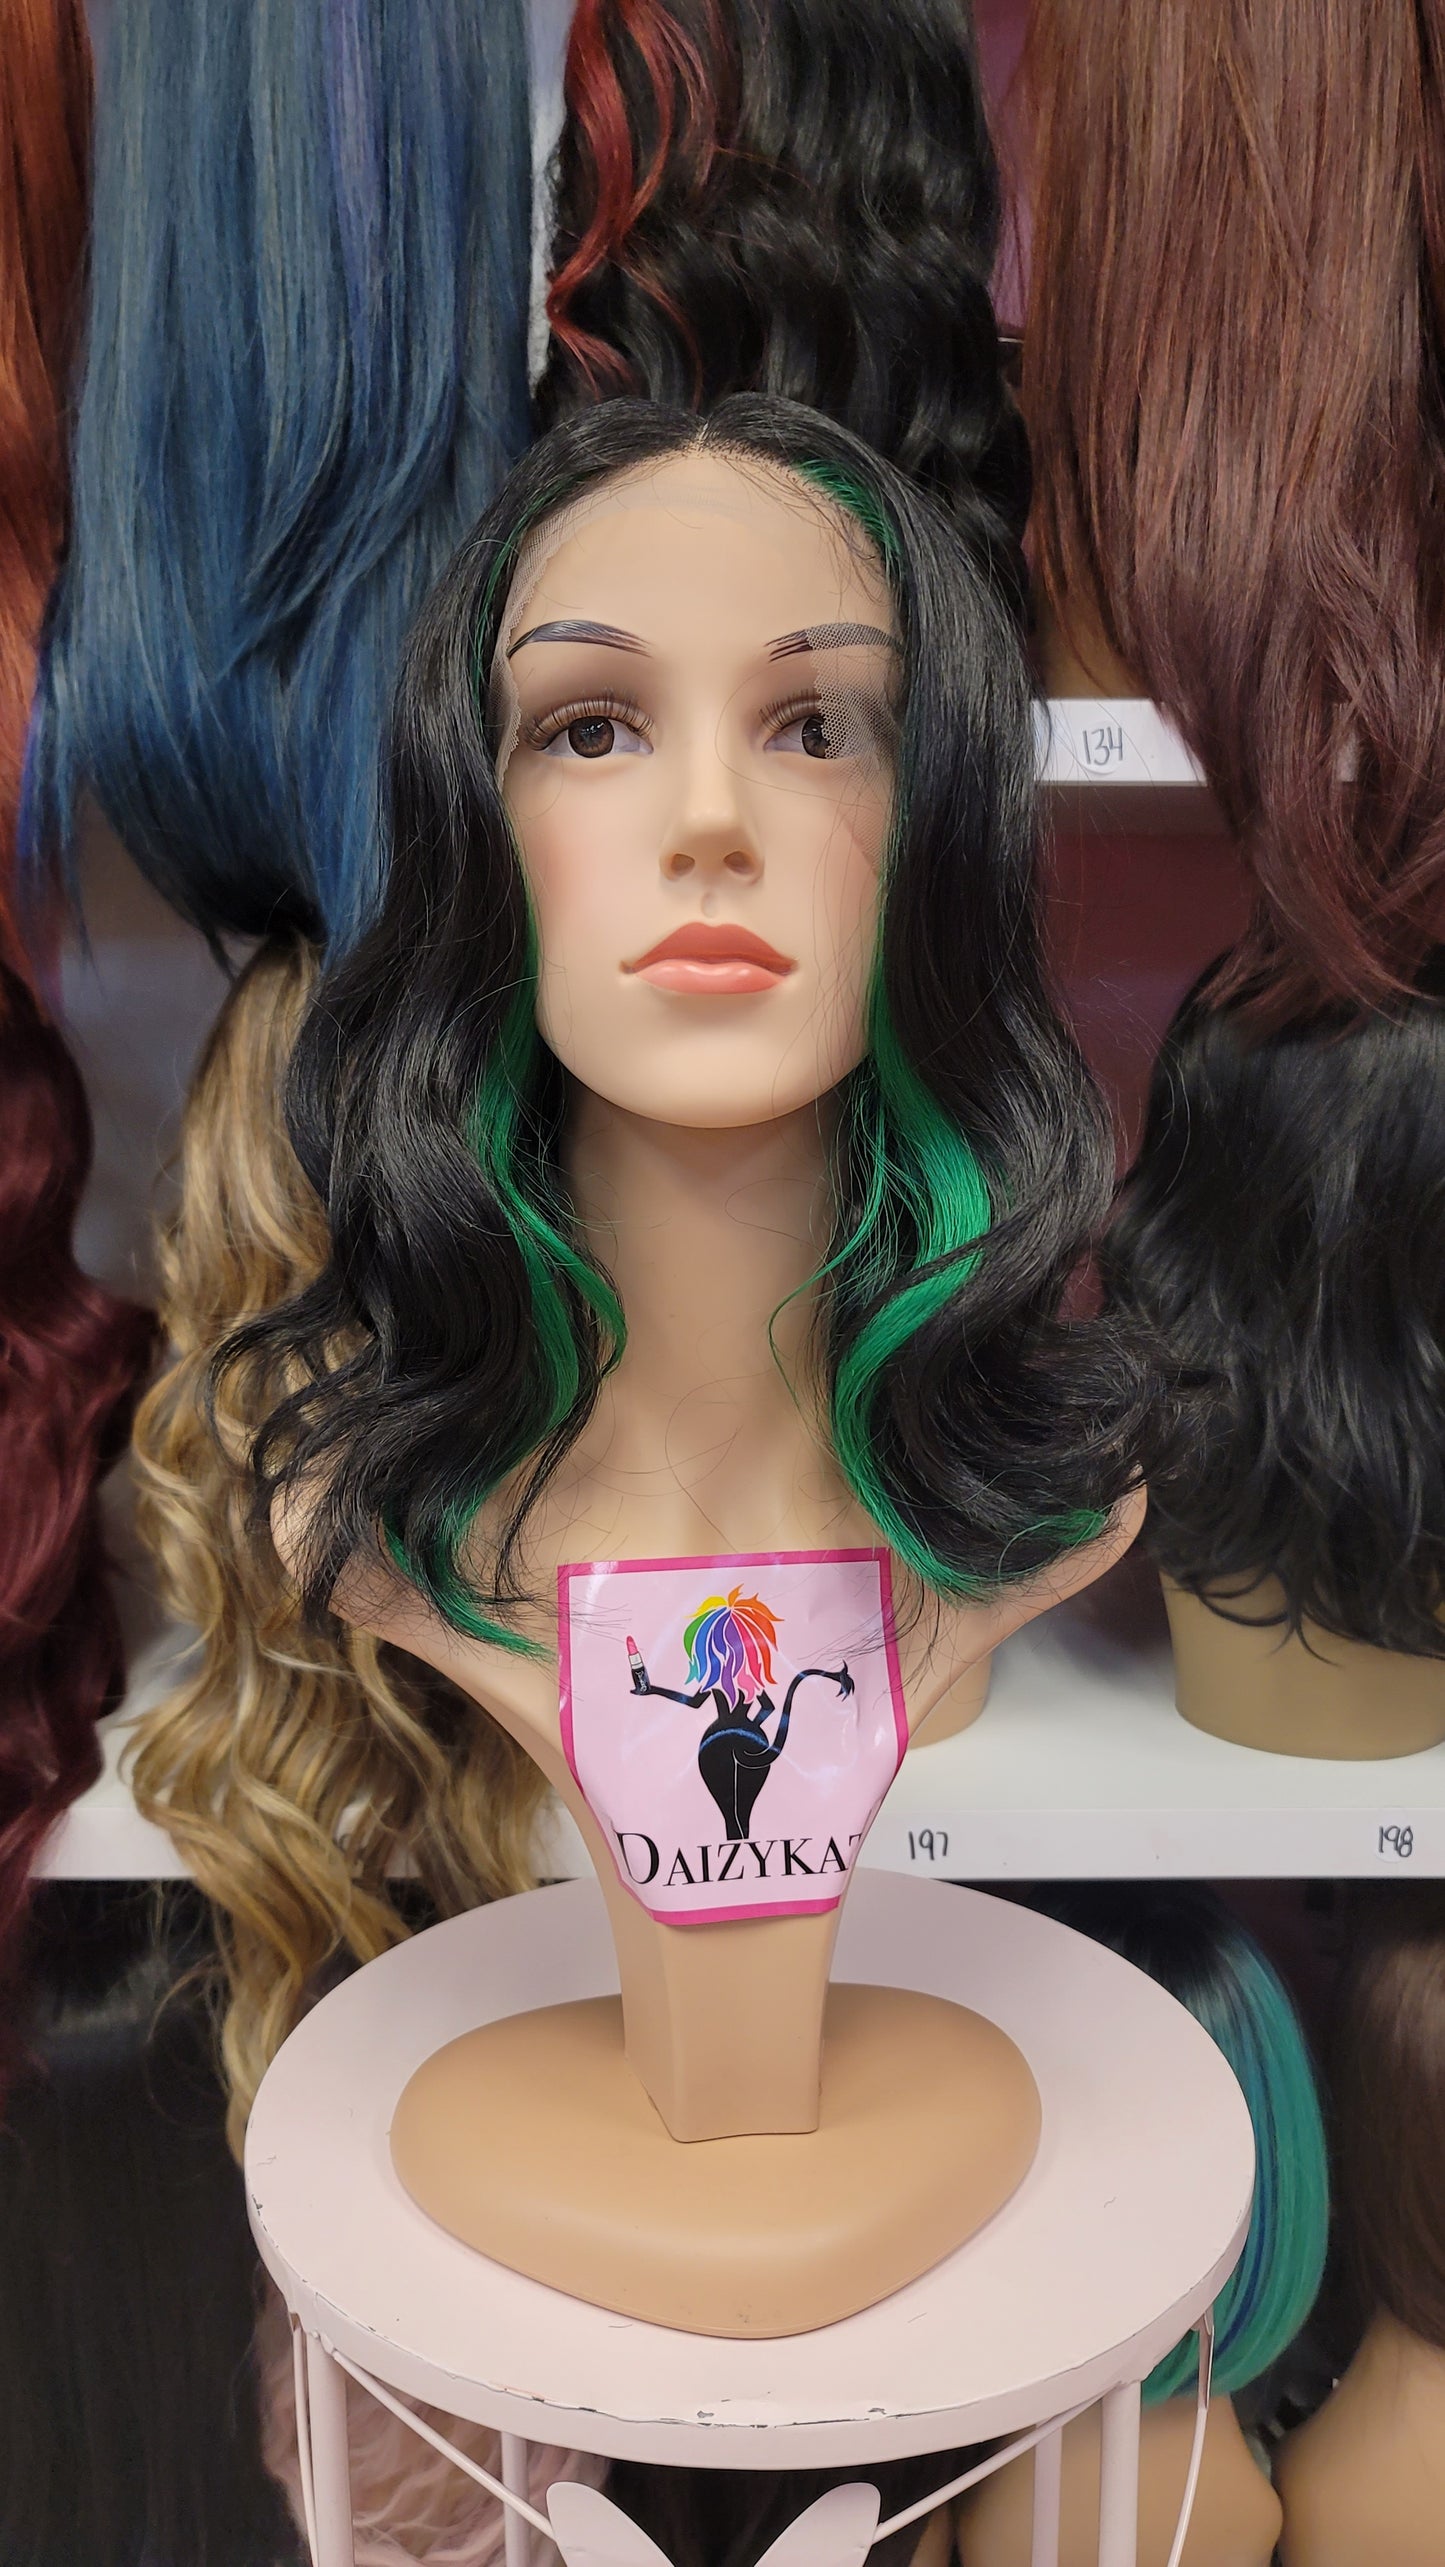 238 JADE - Middle Part Lace Front Wig - 1B/GRN - DaizyKat Cosmetics 238 JADE - Middle Part Lace Front Wig - 1B/GRN DaizyKat Cosmetics Wigs